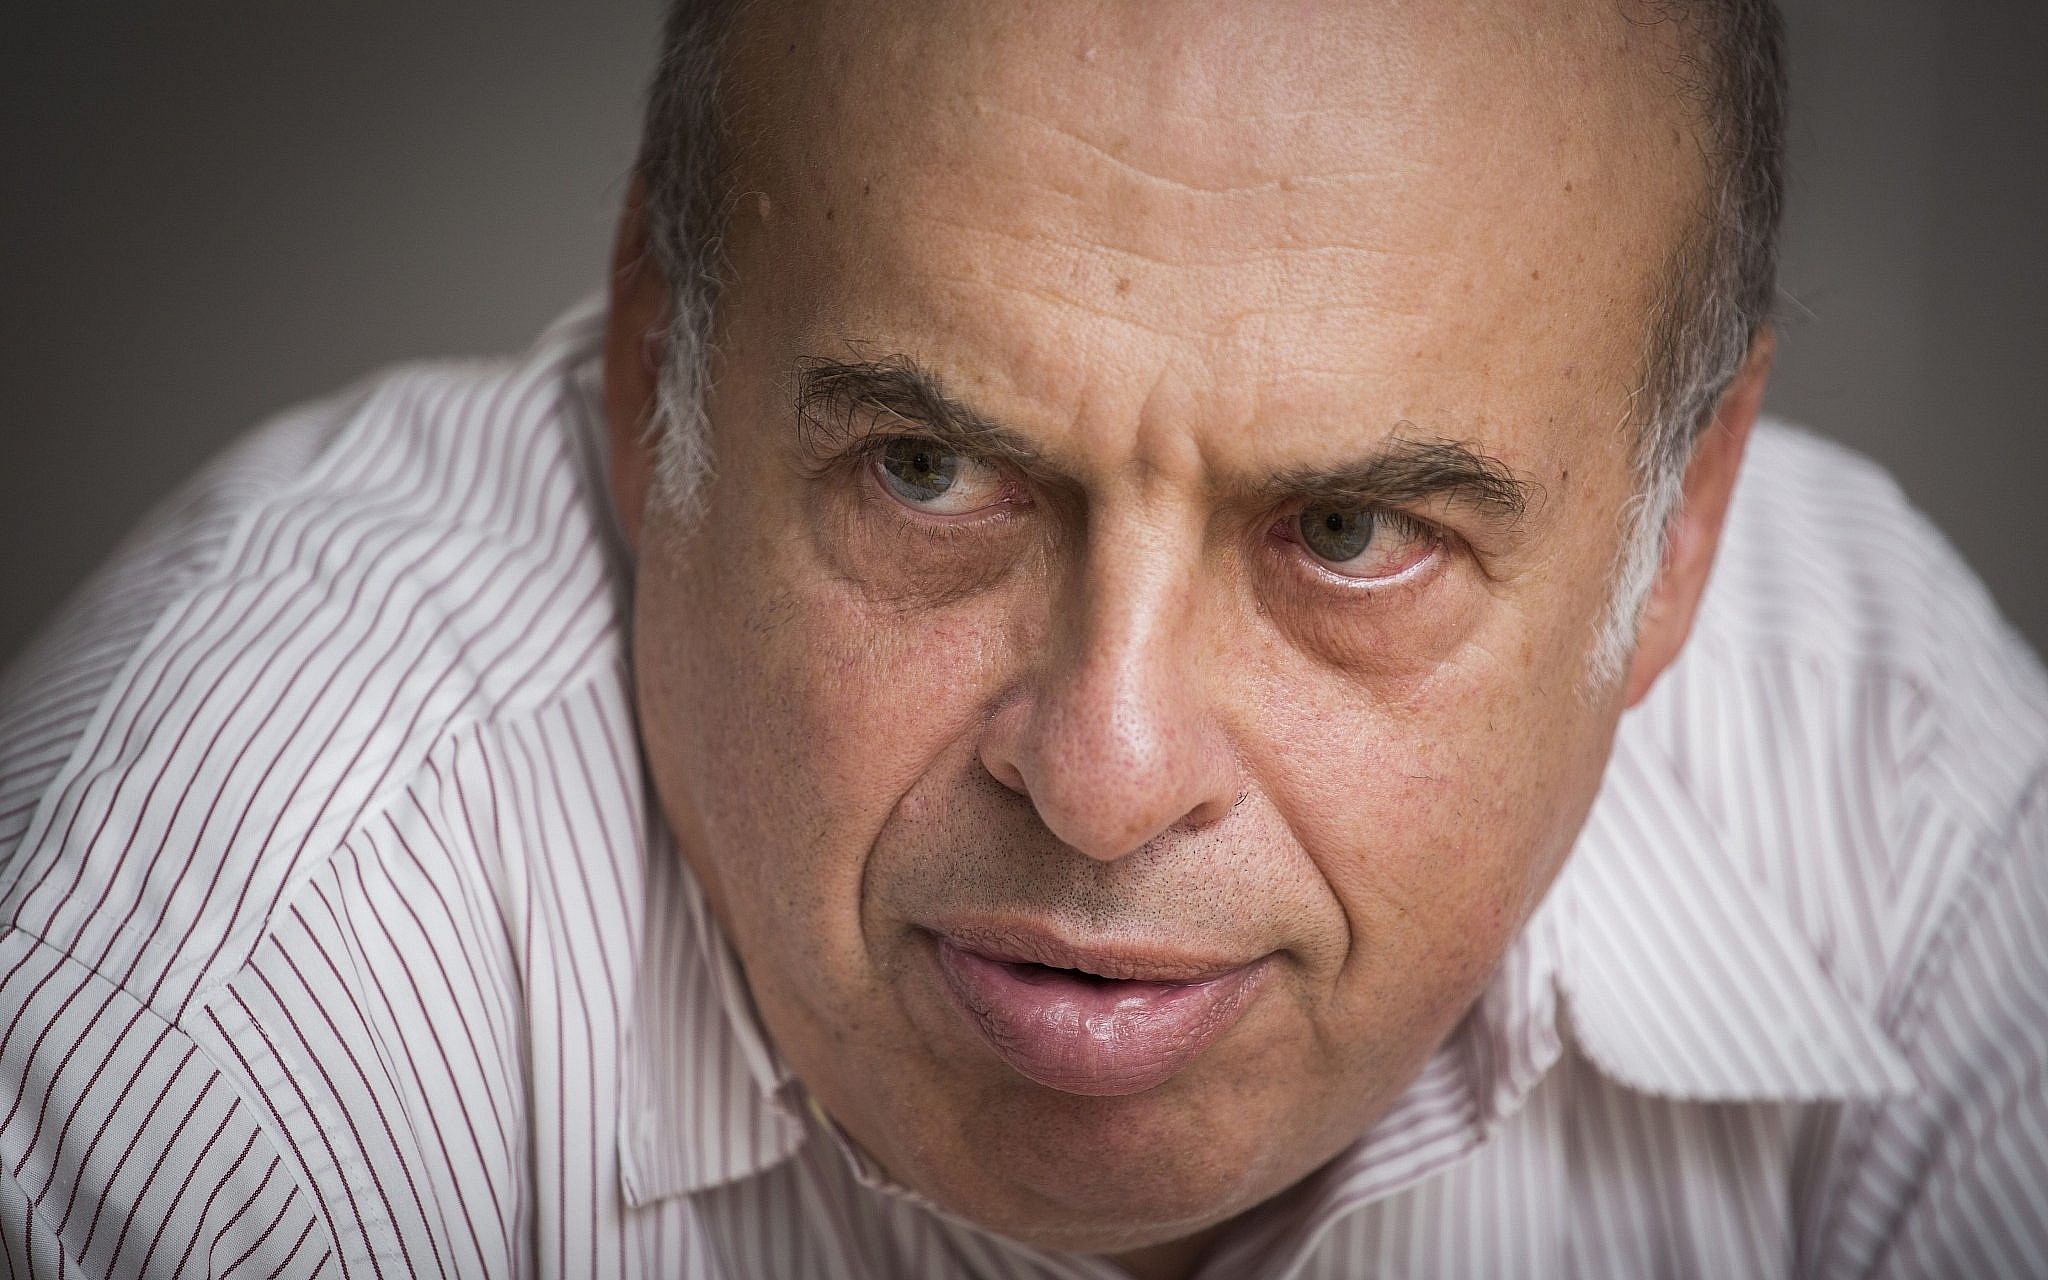 Natan Sharansky, the chairman of the Jewish Agency, at his office in Jerusalem on September 22, 2014. (Hadas Parush/Flash90)